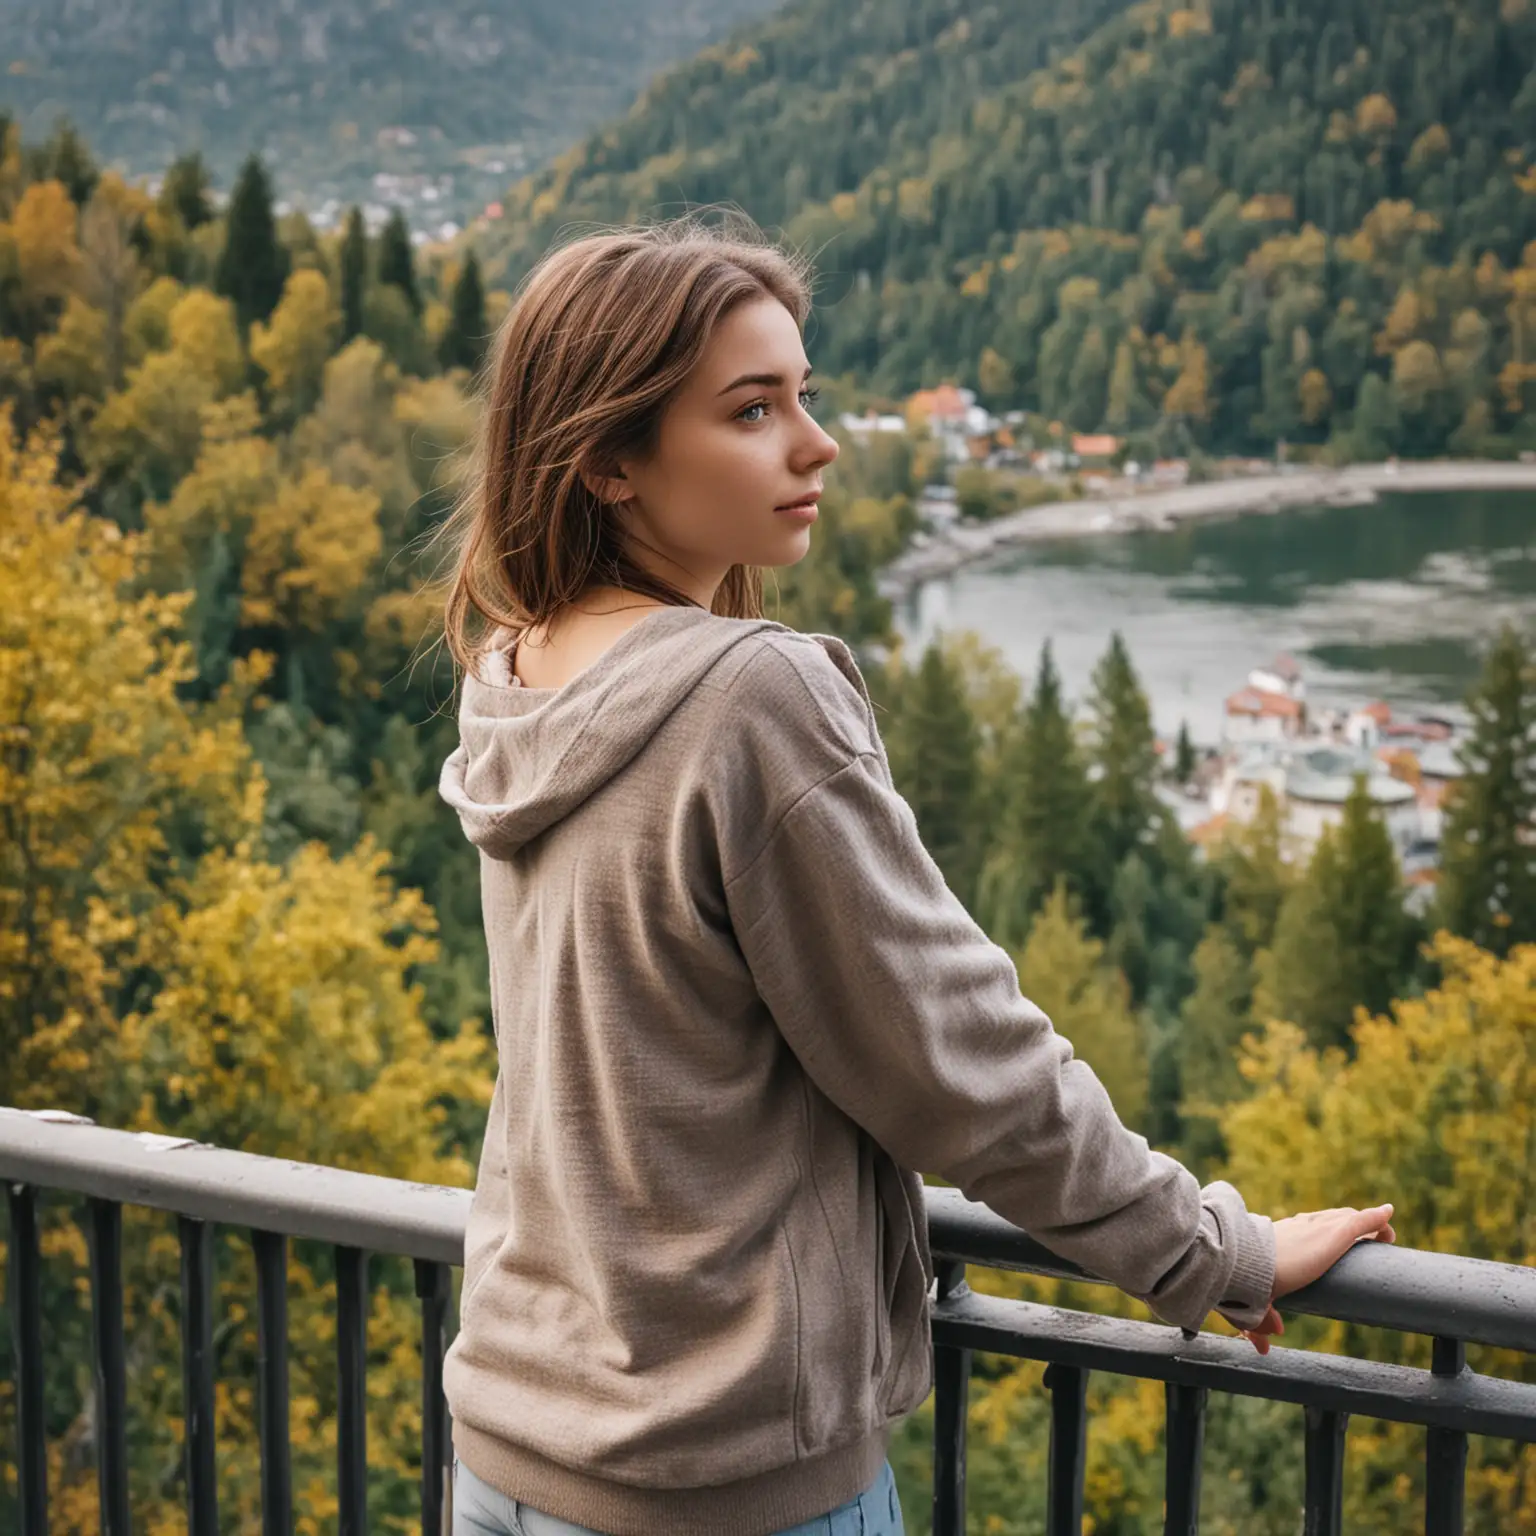 a young woman stands at the railing looking into the distance, the scenery outside is beautiful and it's a tourist area, she has her back toward the camera